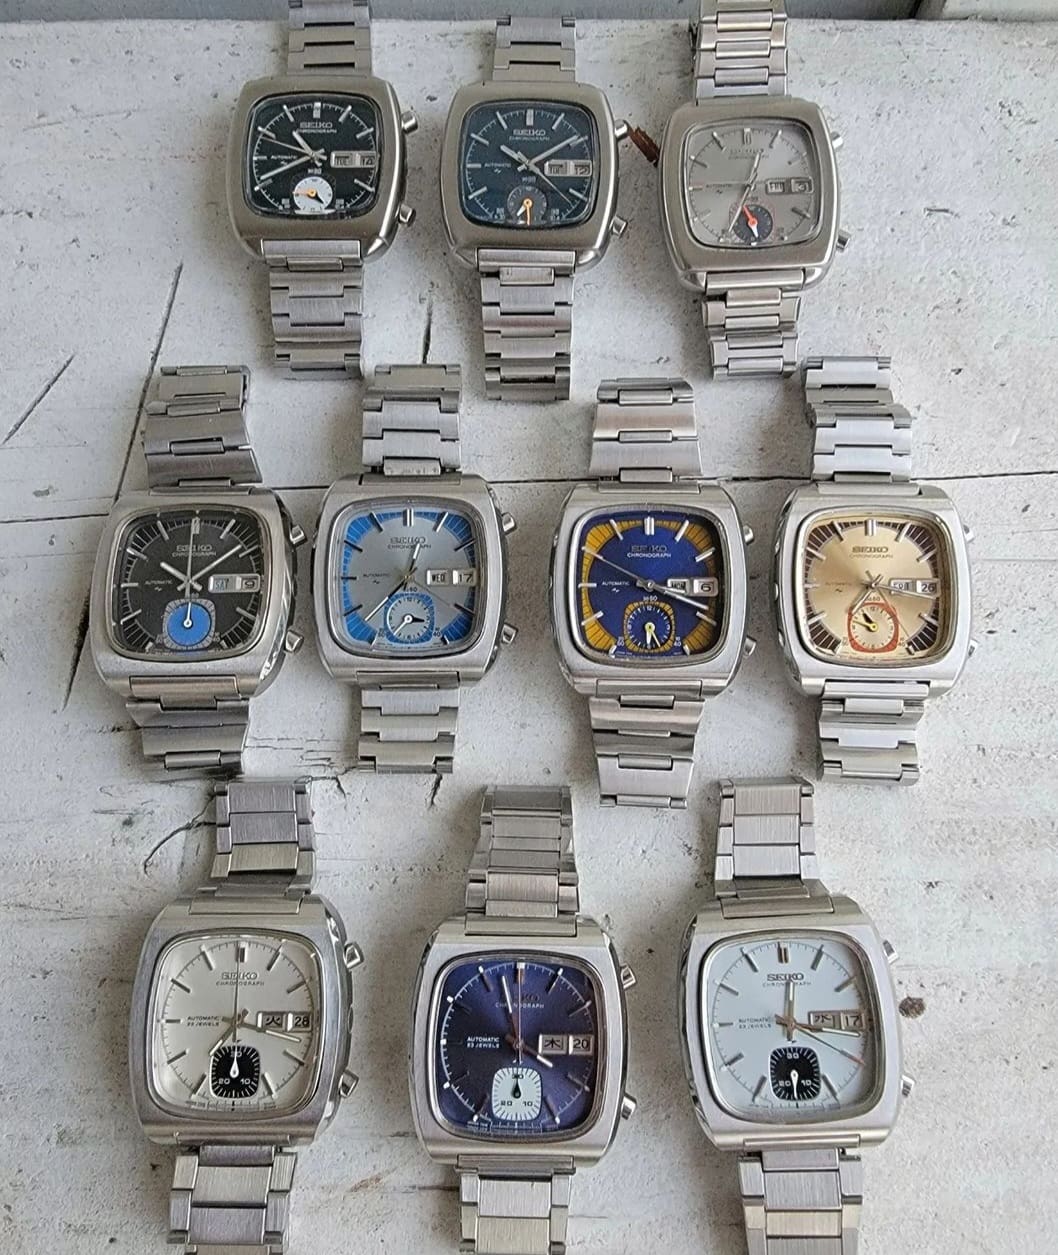 Check out this full set of Seiko 